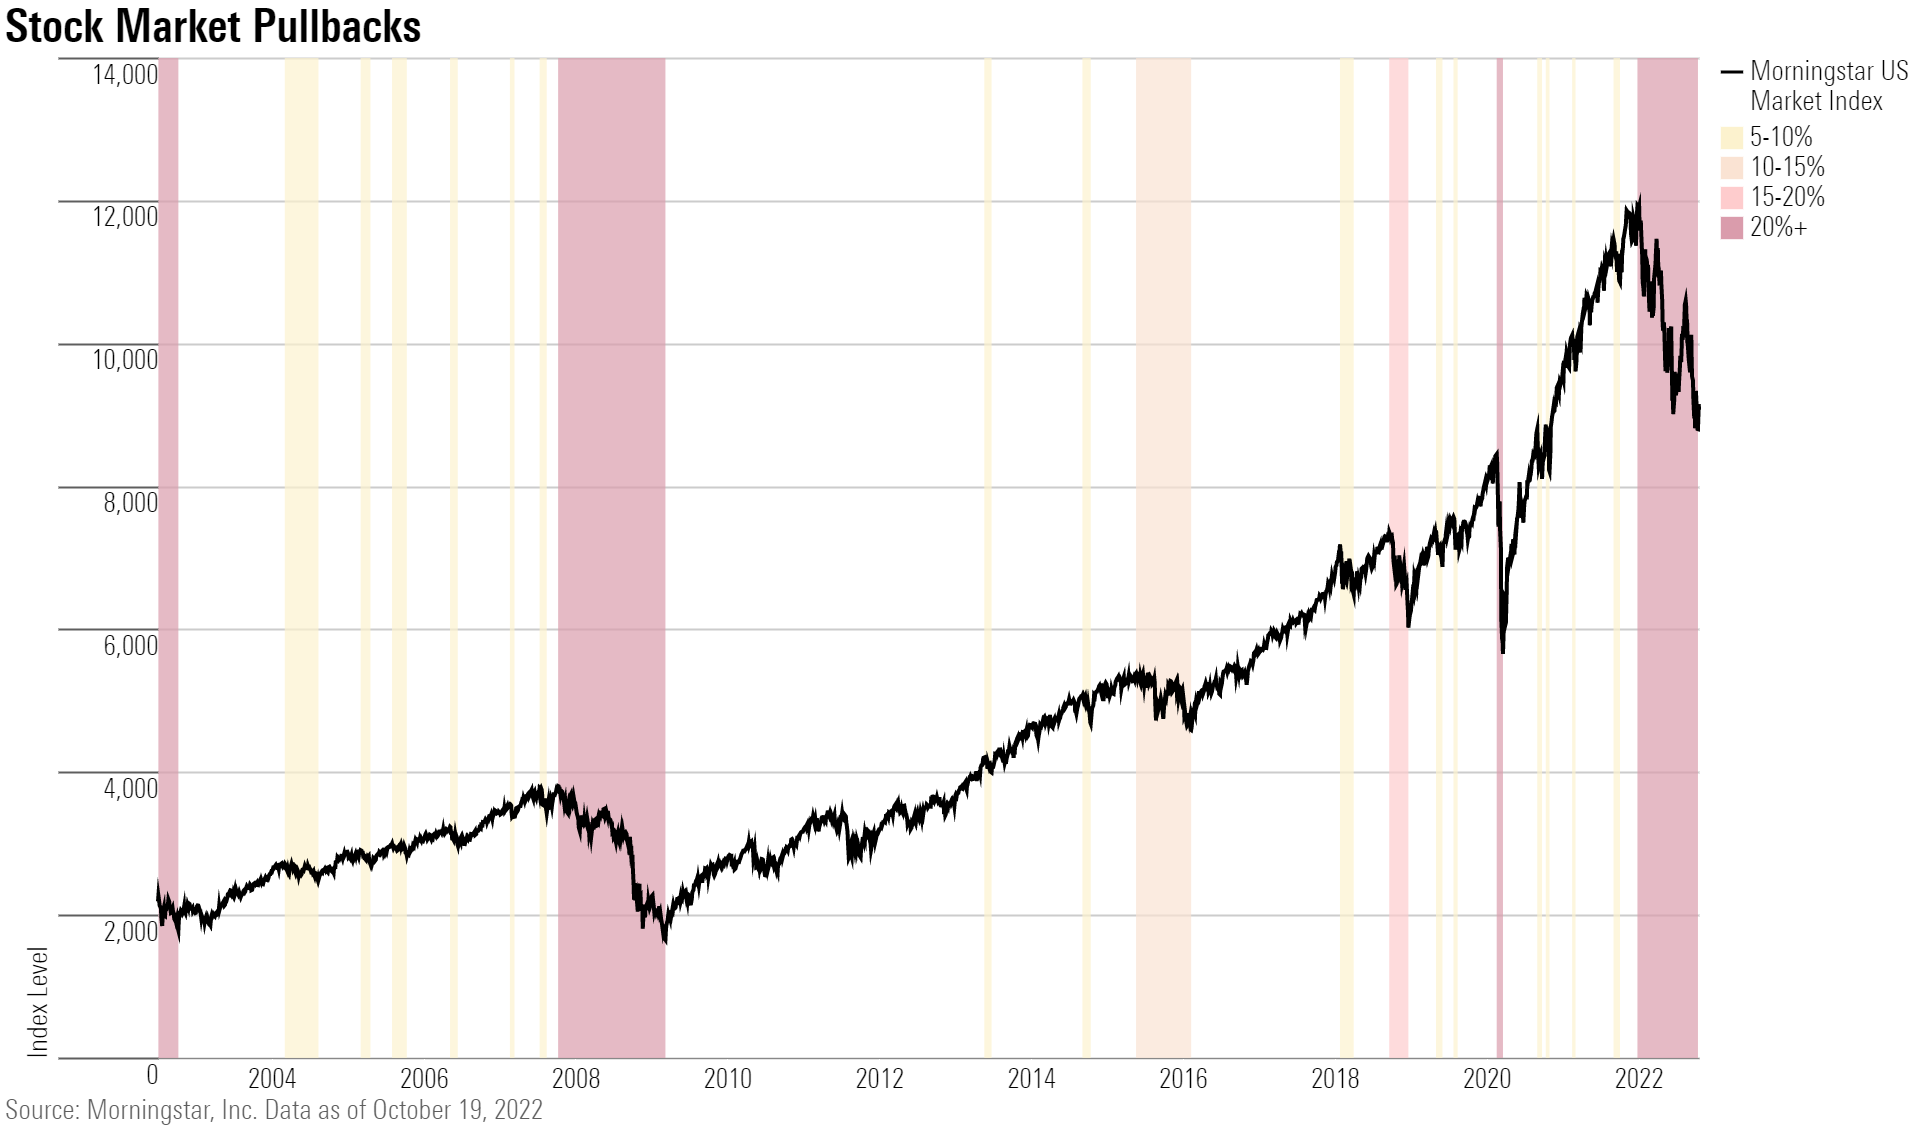 Line chart showing major pullbacks in the stock market